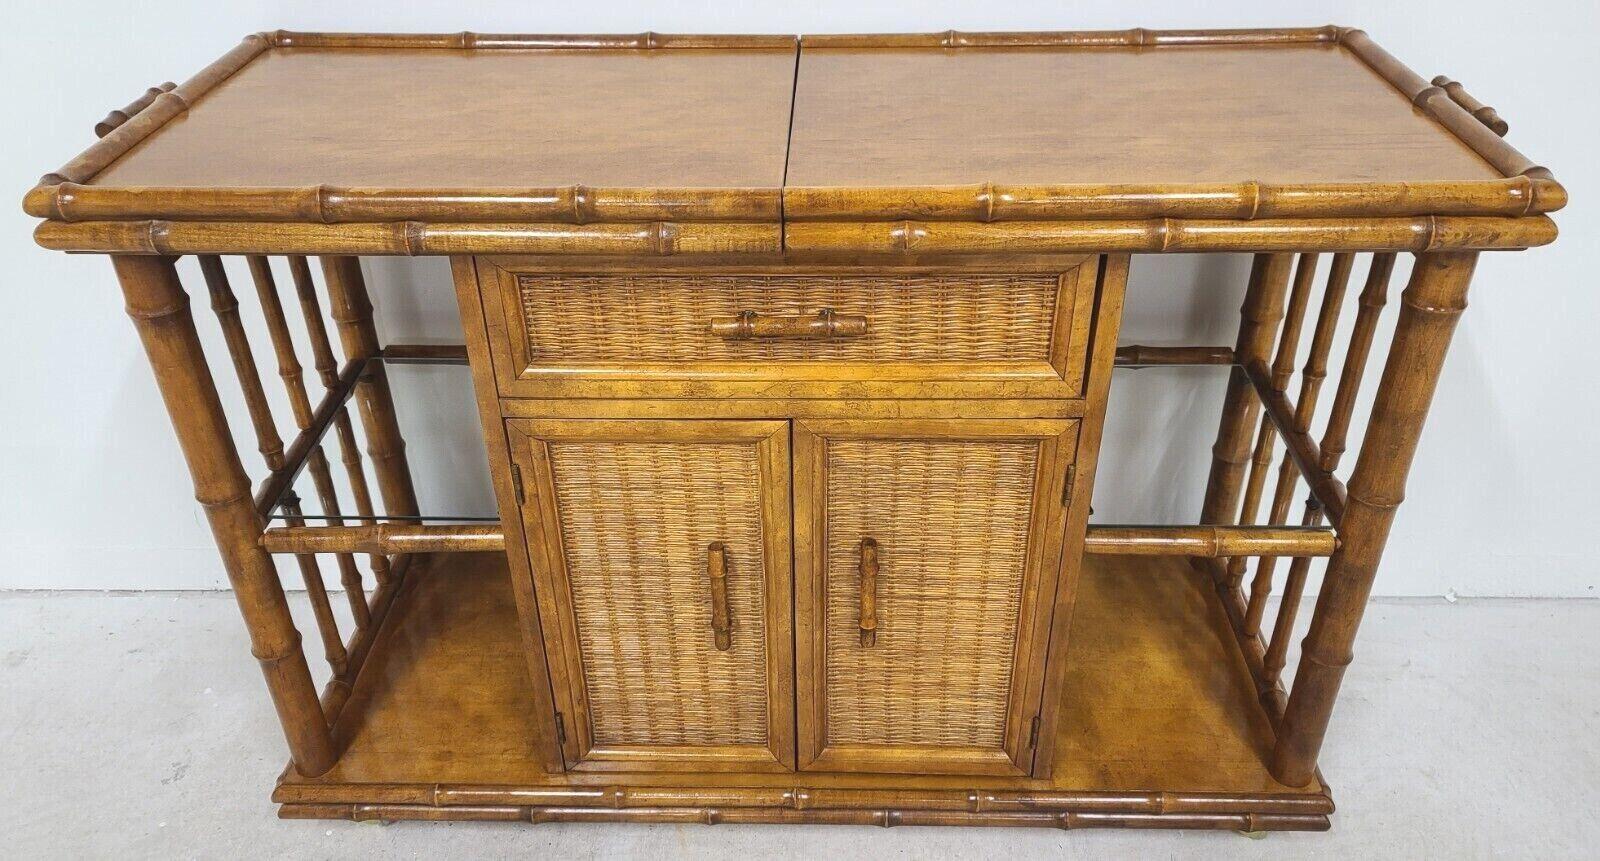 For full item description be sure to click on CONTINUE READING at the bottom of this listing.

Offering one of our recent palm beach estate fine furniture acquisitions of a
American of Martinsville faux bamboo rattan rolling slide top sideboard